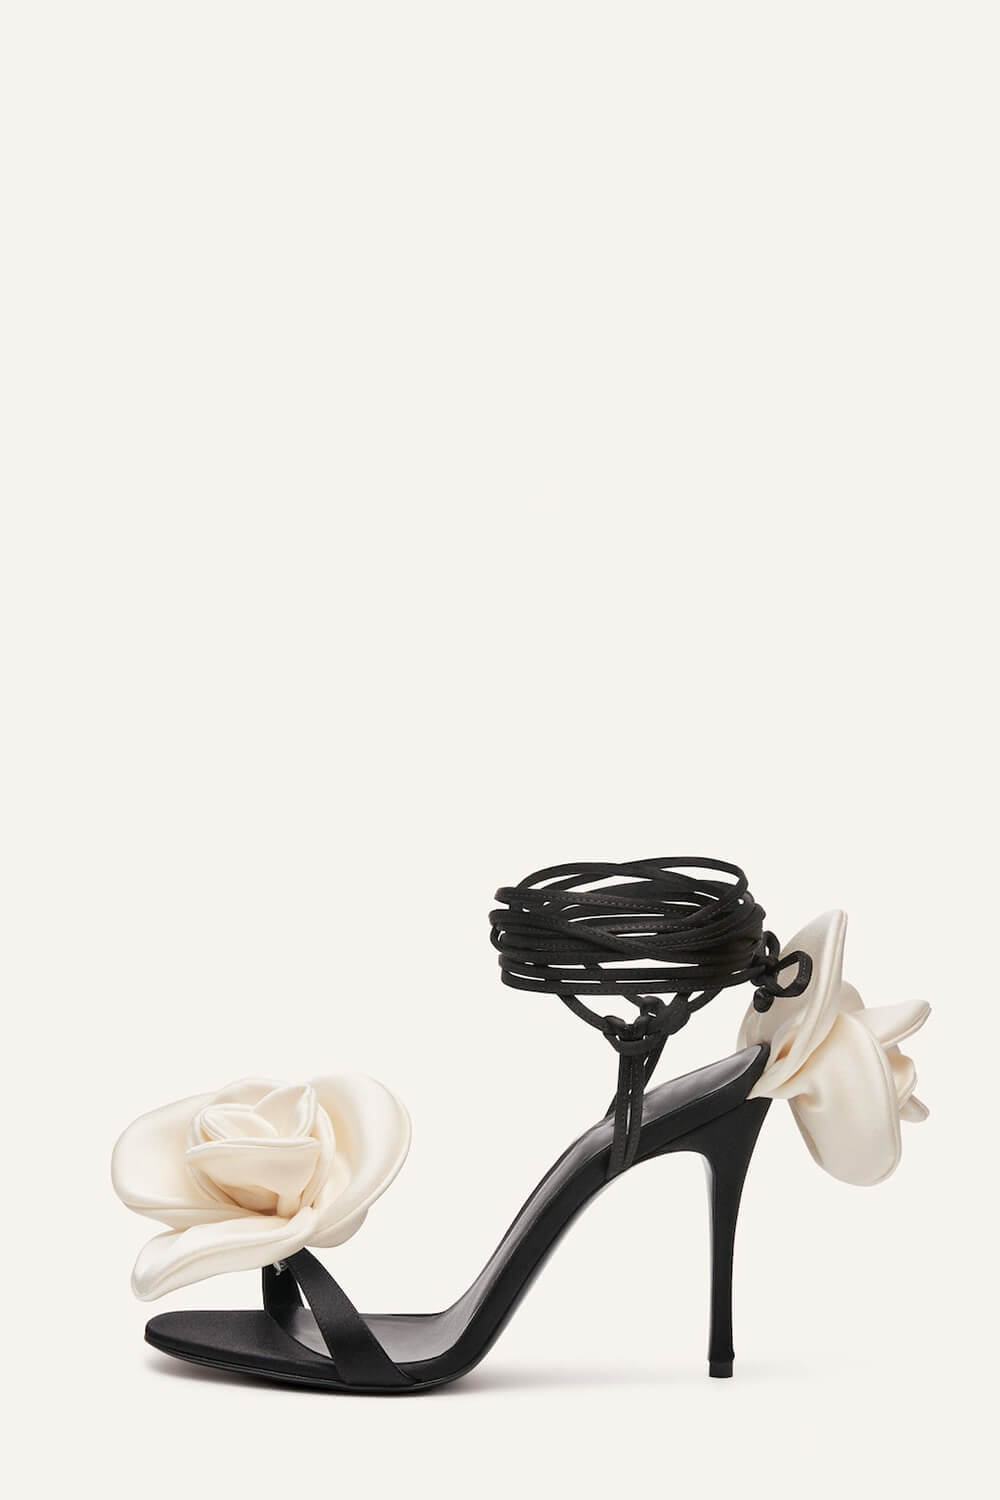 Ivory And Black Flower Embellished Satin Lace Up Open Toe Stiletto Heels Sandals